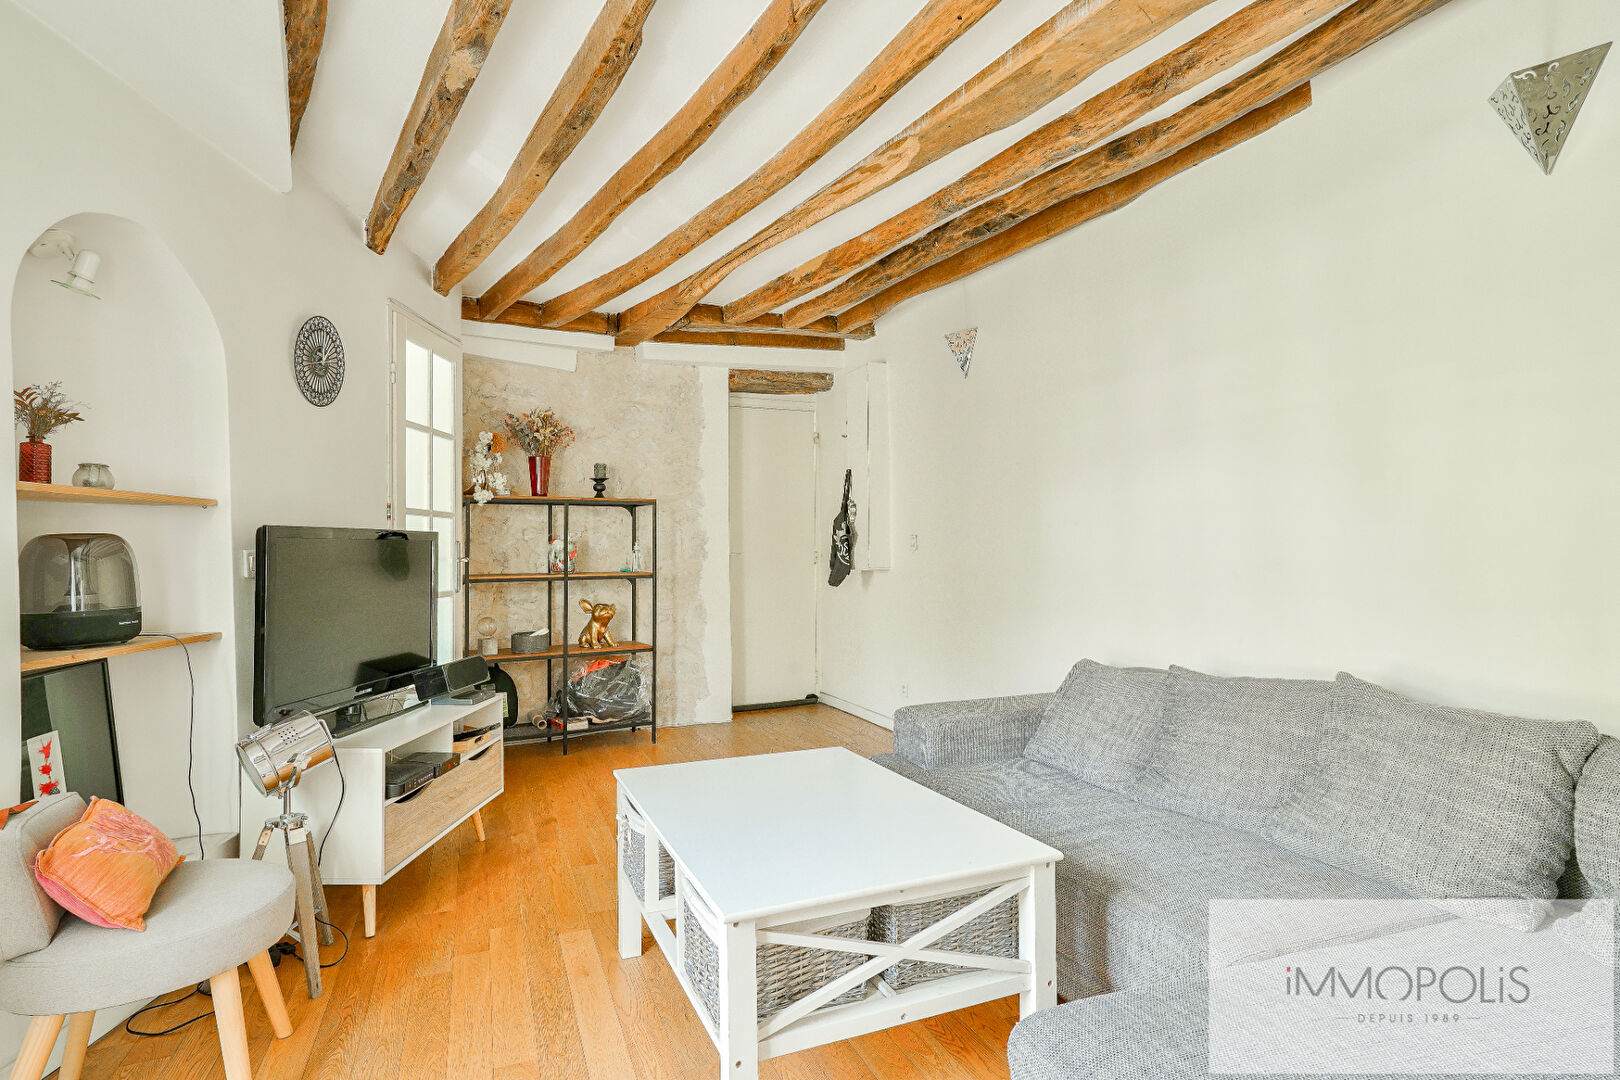 Apartment two rooms of 35m² full of charm 2